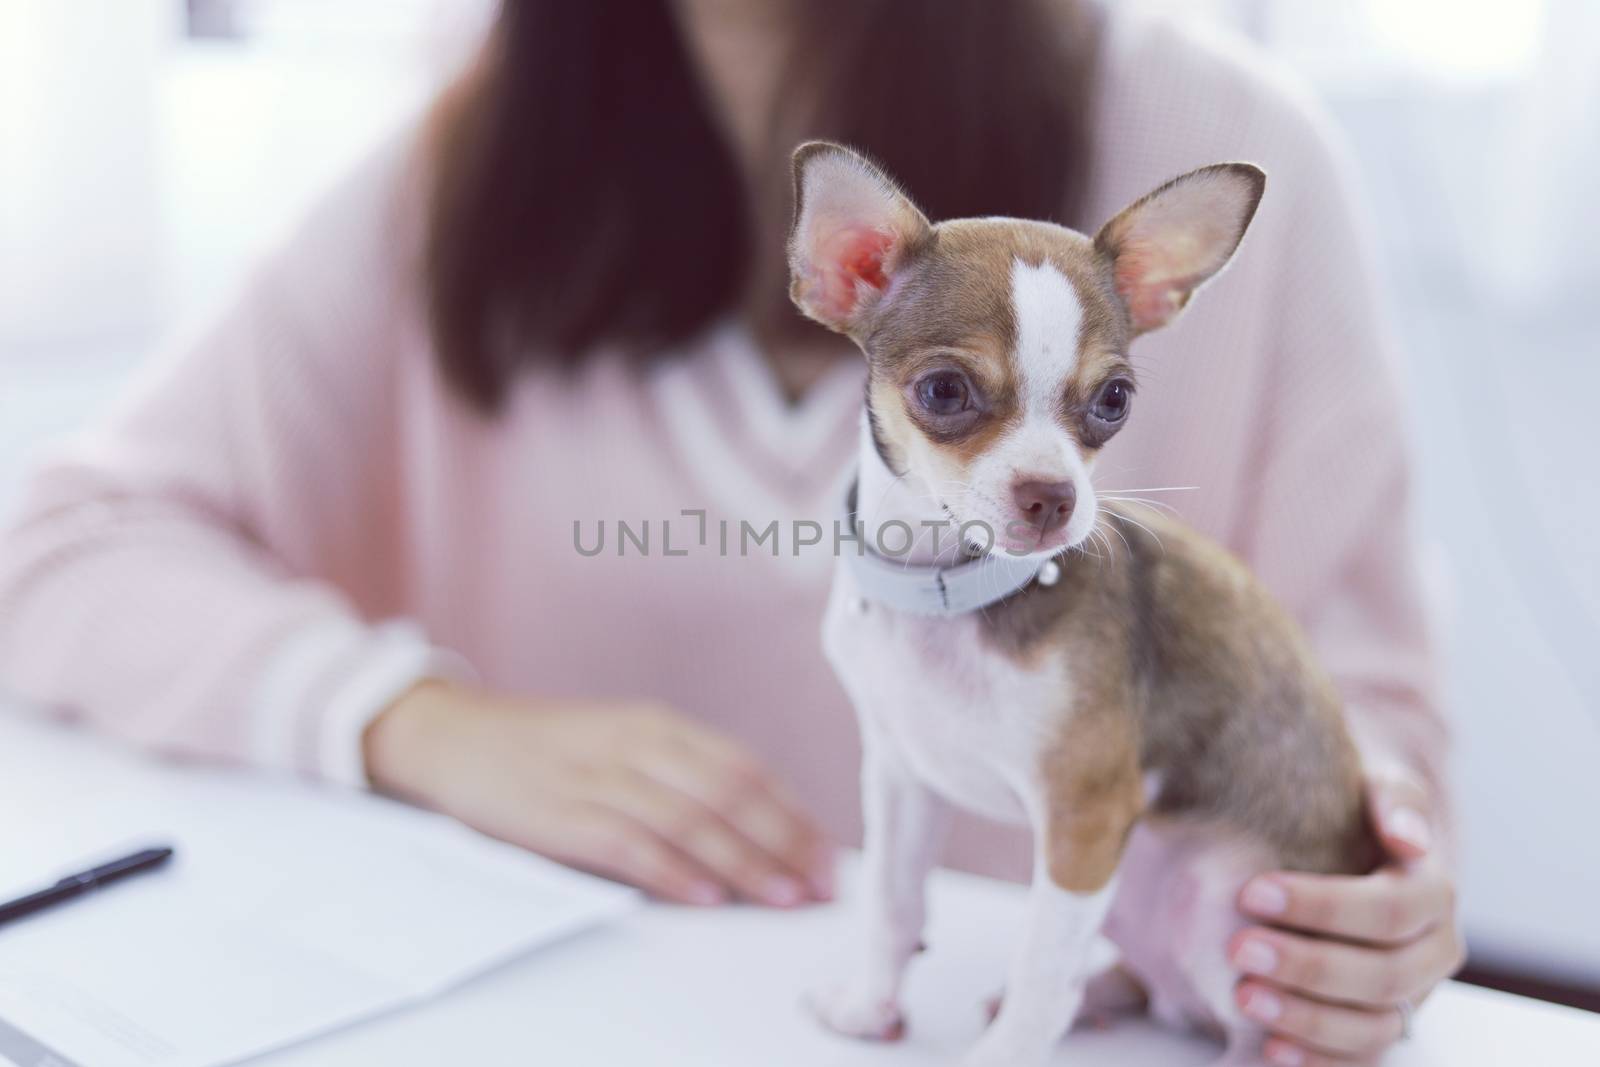 Coronavirus. Business woman working from home with dog Concept h by peandben